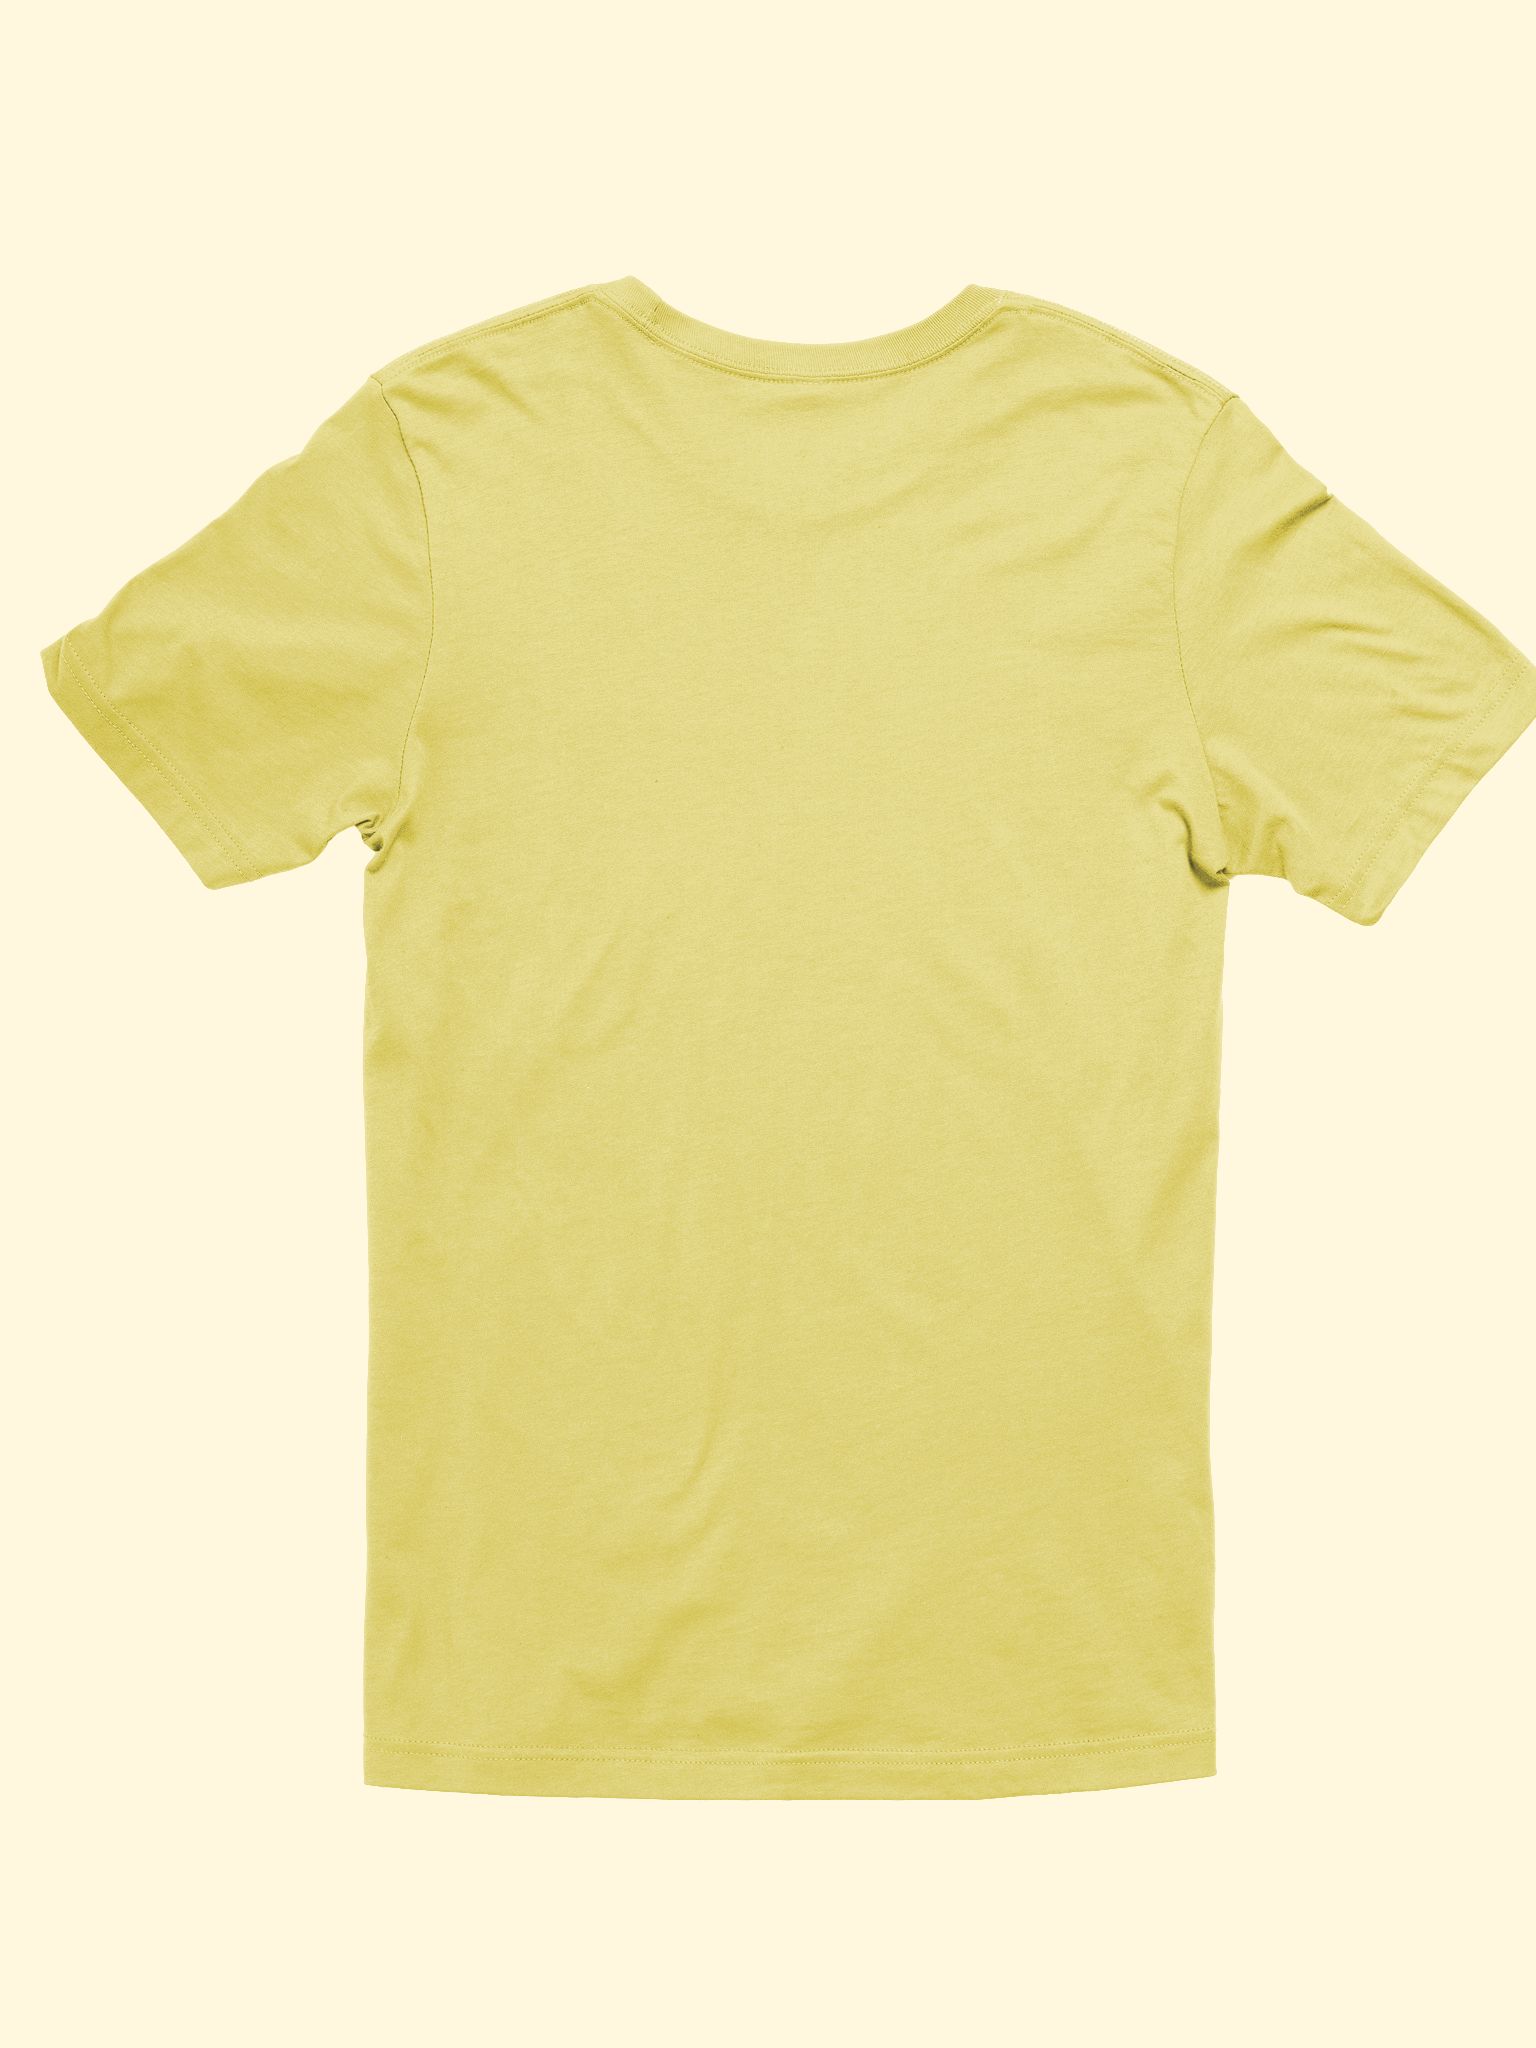 FFLTEES - High Quality Tailored T-Shirts